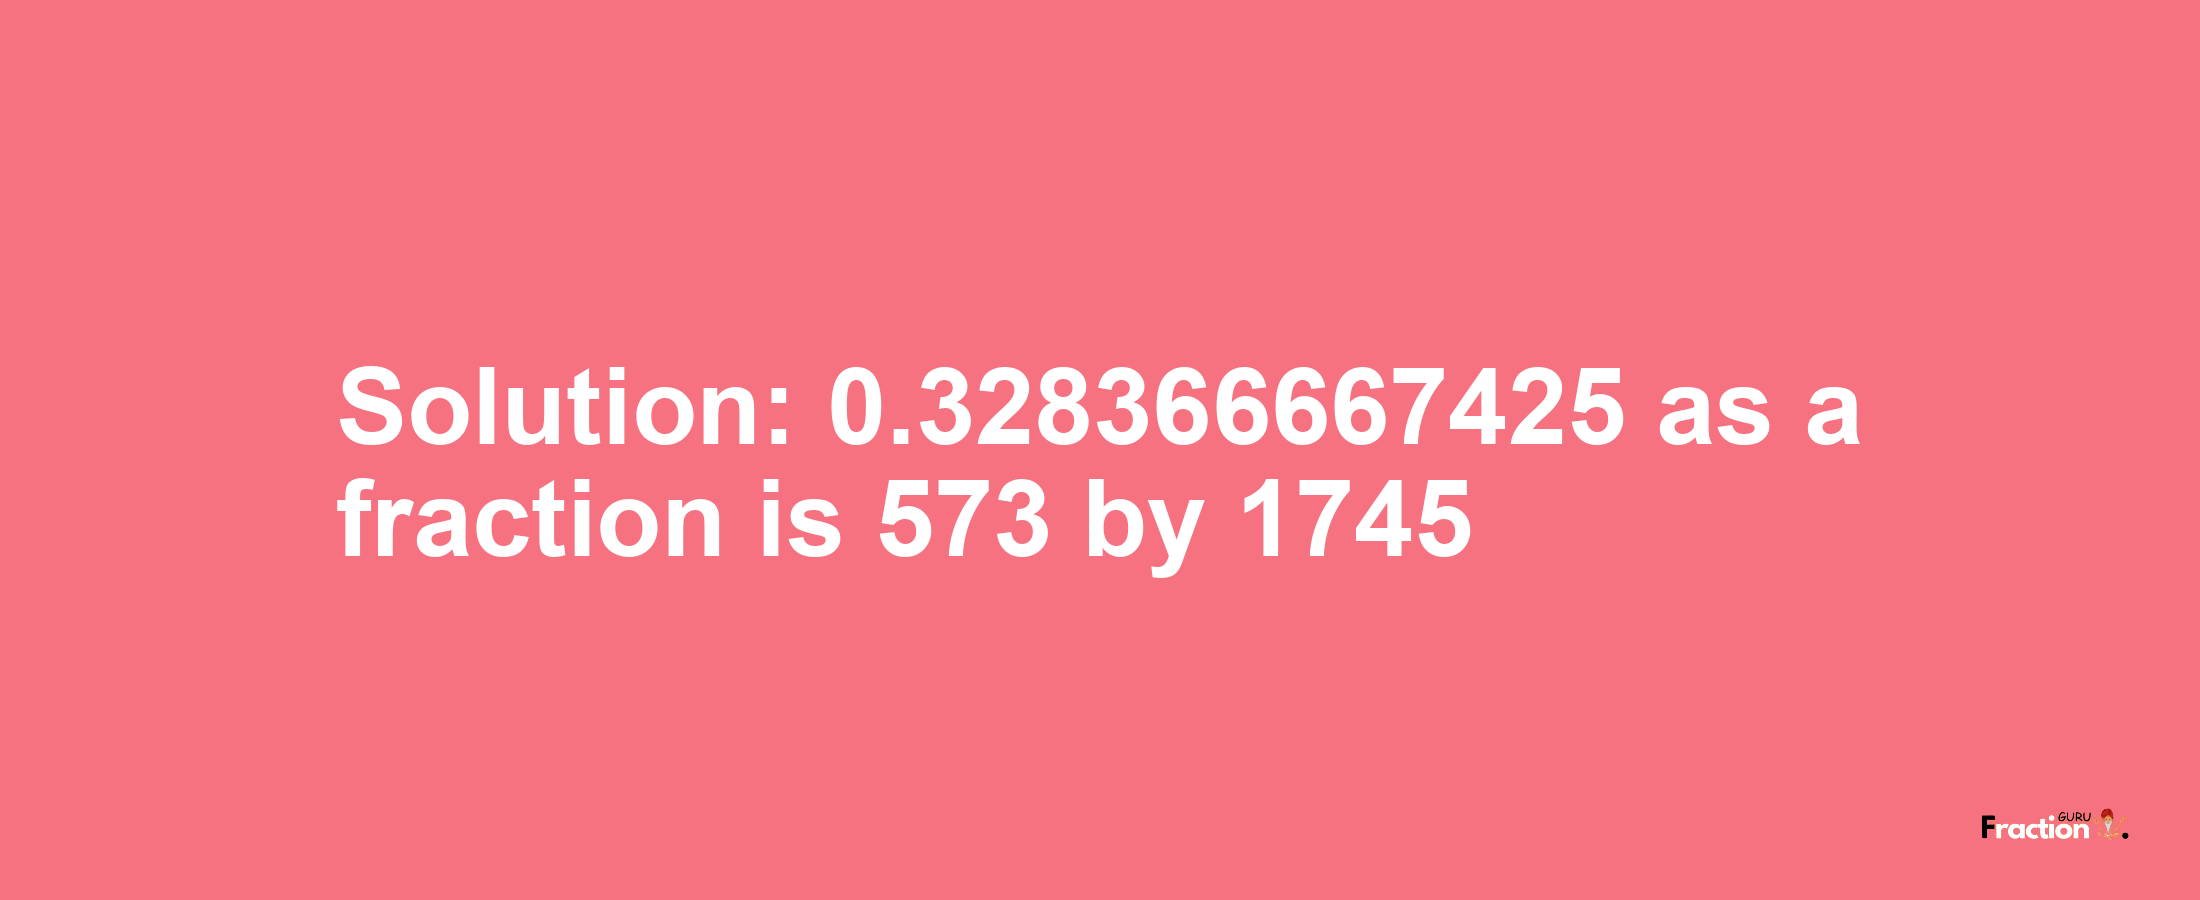 Solution:0.328366667425 as a fraction is 573/1745